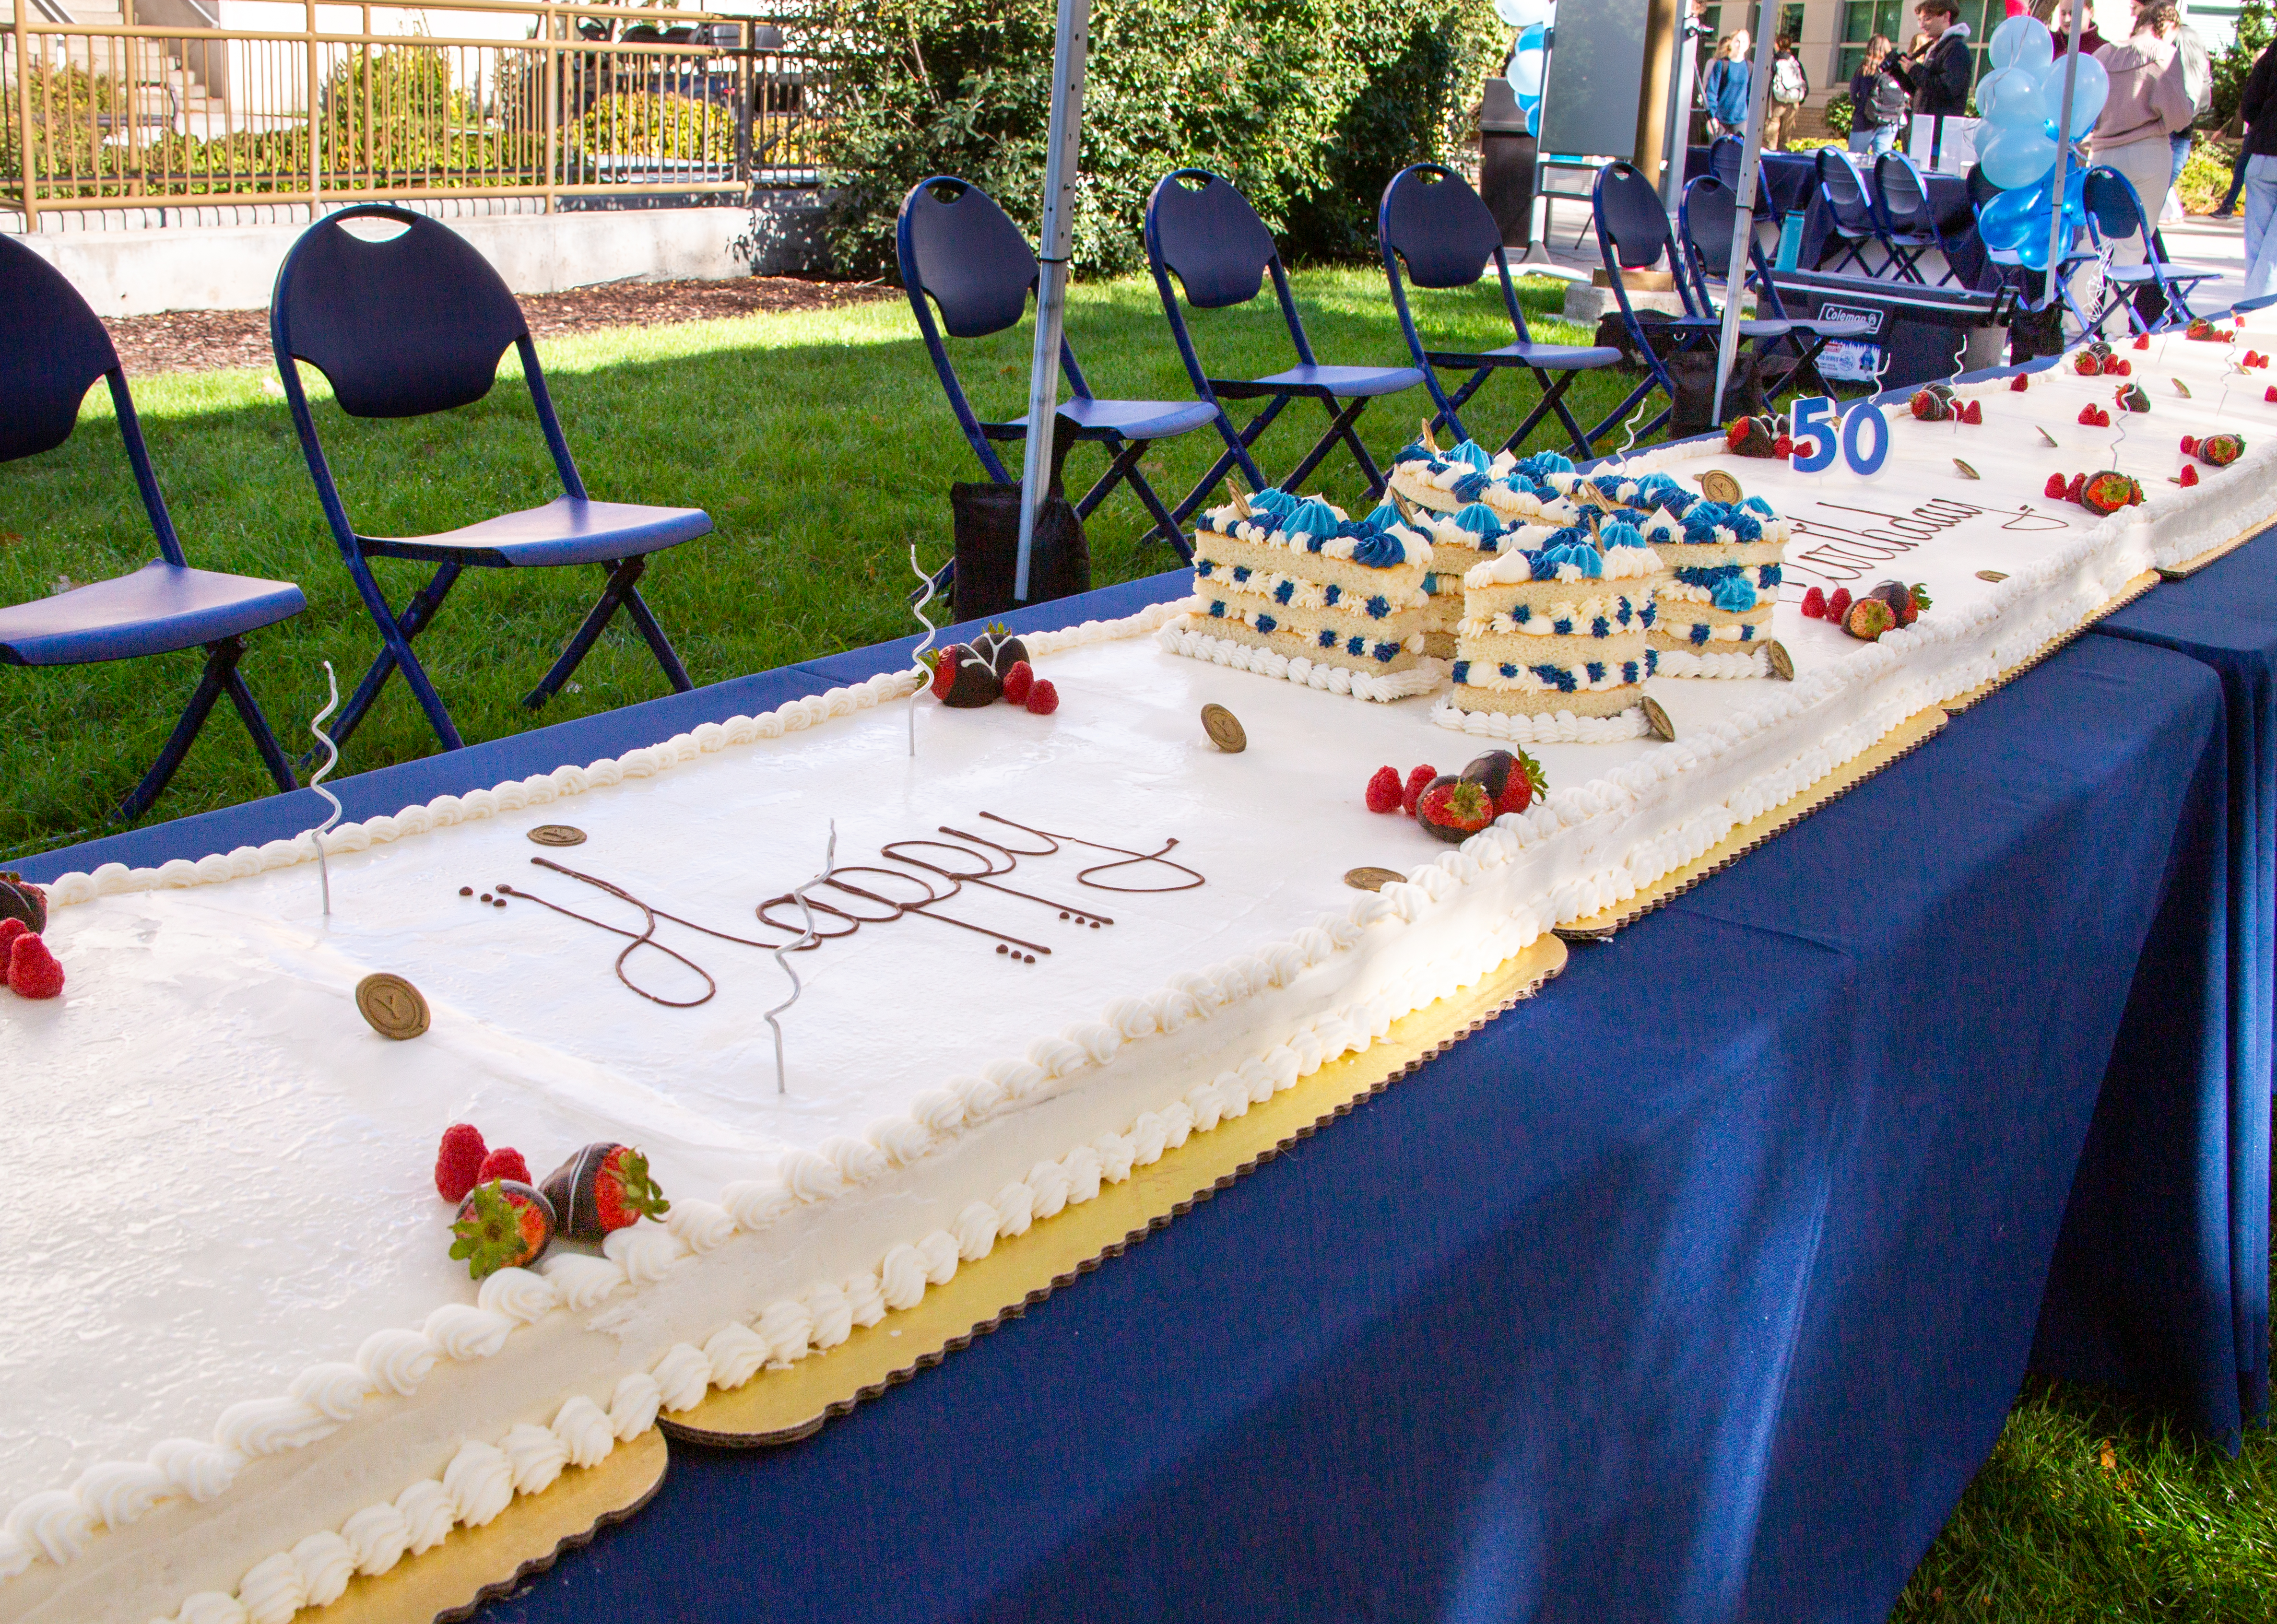 50ft Long Cake For 50 Years Of The